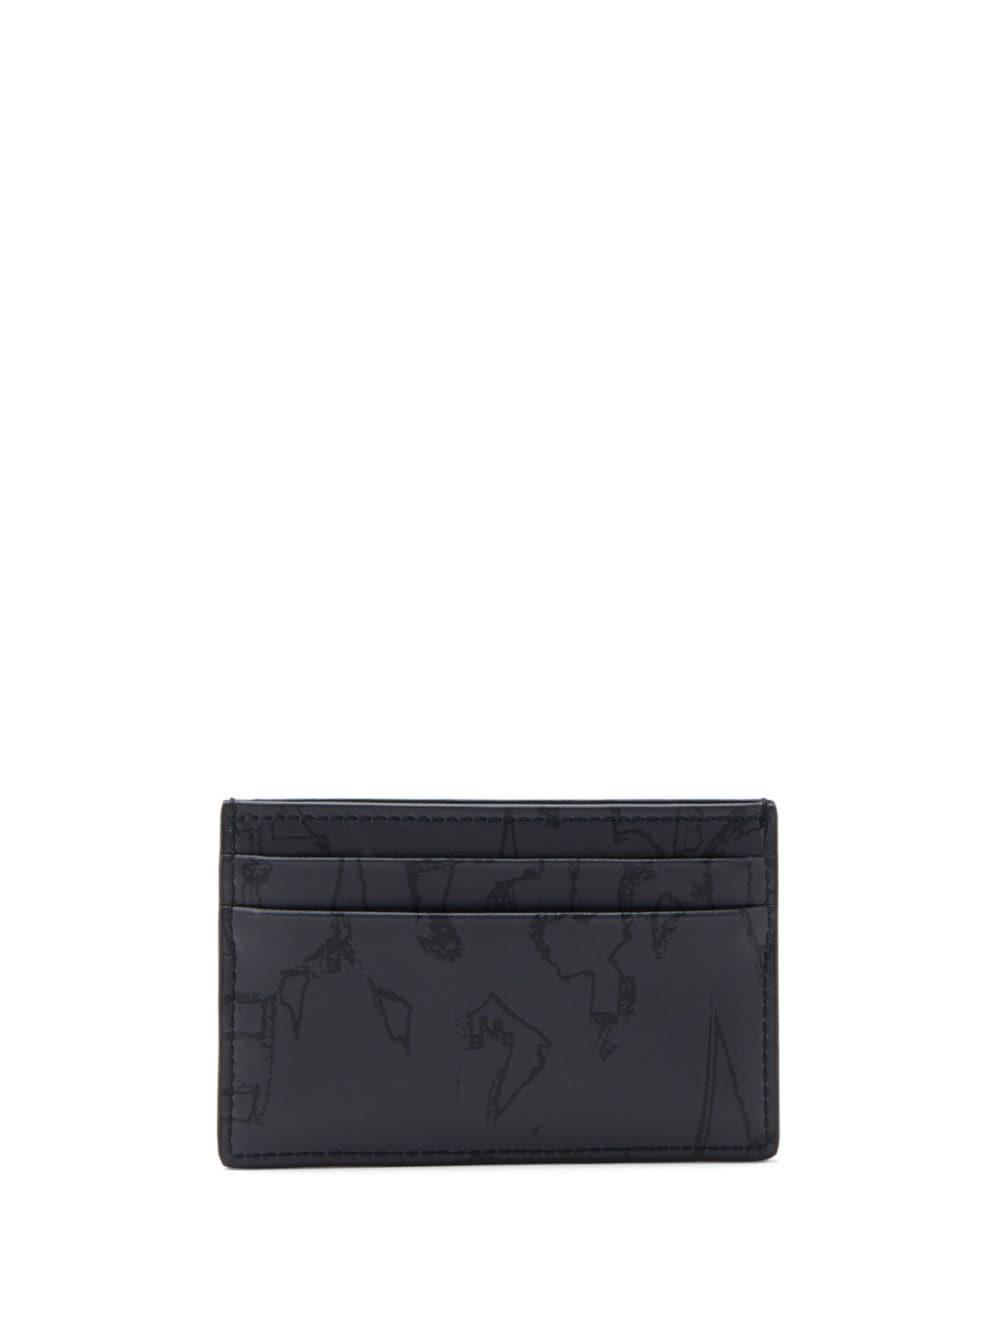 Image 2 of Alexander McQueen Graffiti leather card holder